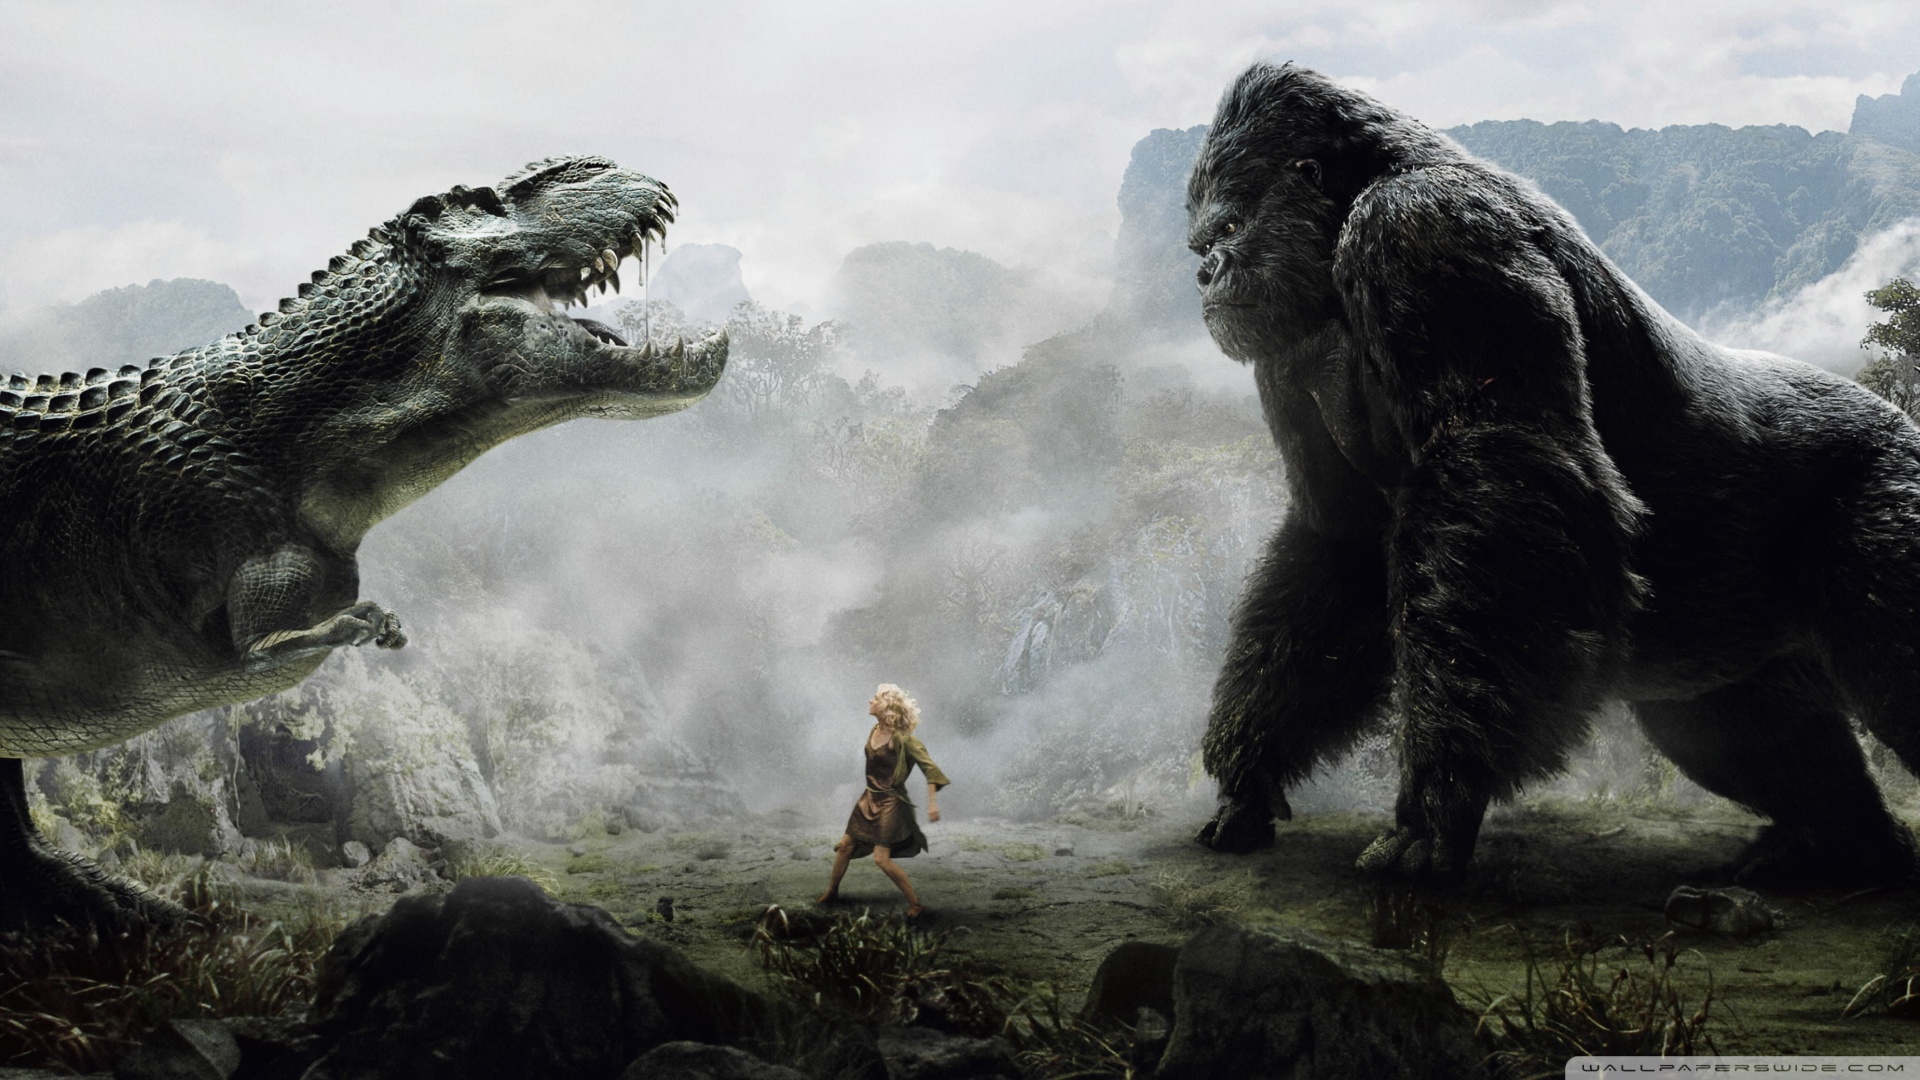 King Kong Vs. Godzilla  Backgrounds, Compatible - PC, Mobile, Gadgets| 1920x1080 px